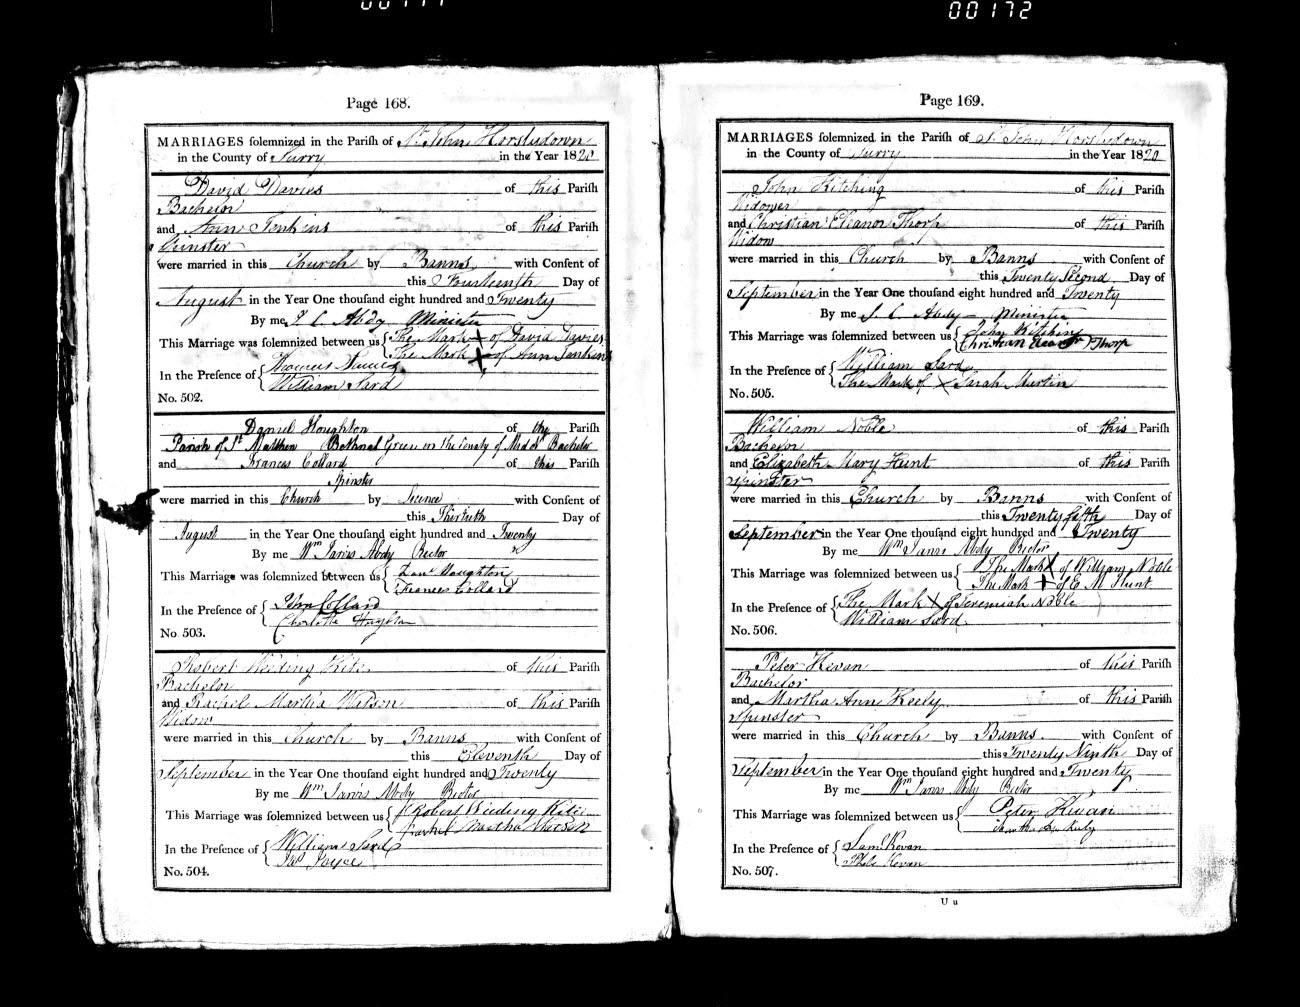 1823 marriage of Martha Ann Keely to Peter Kevan